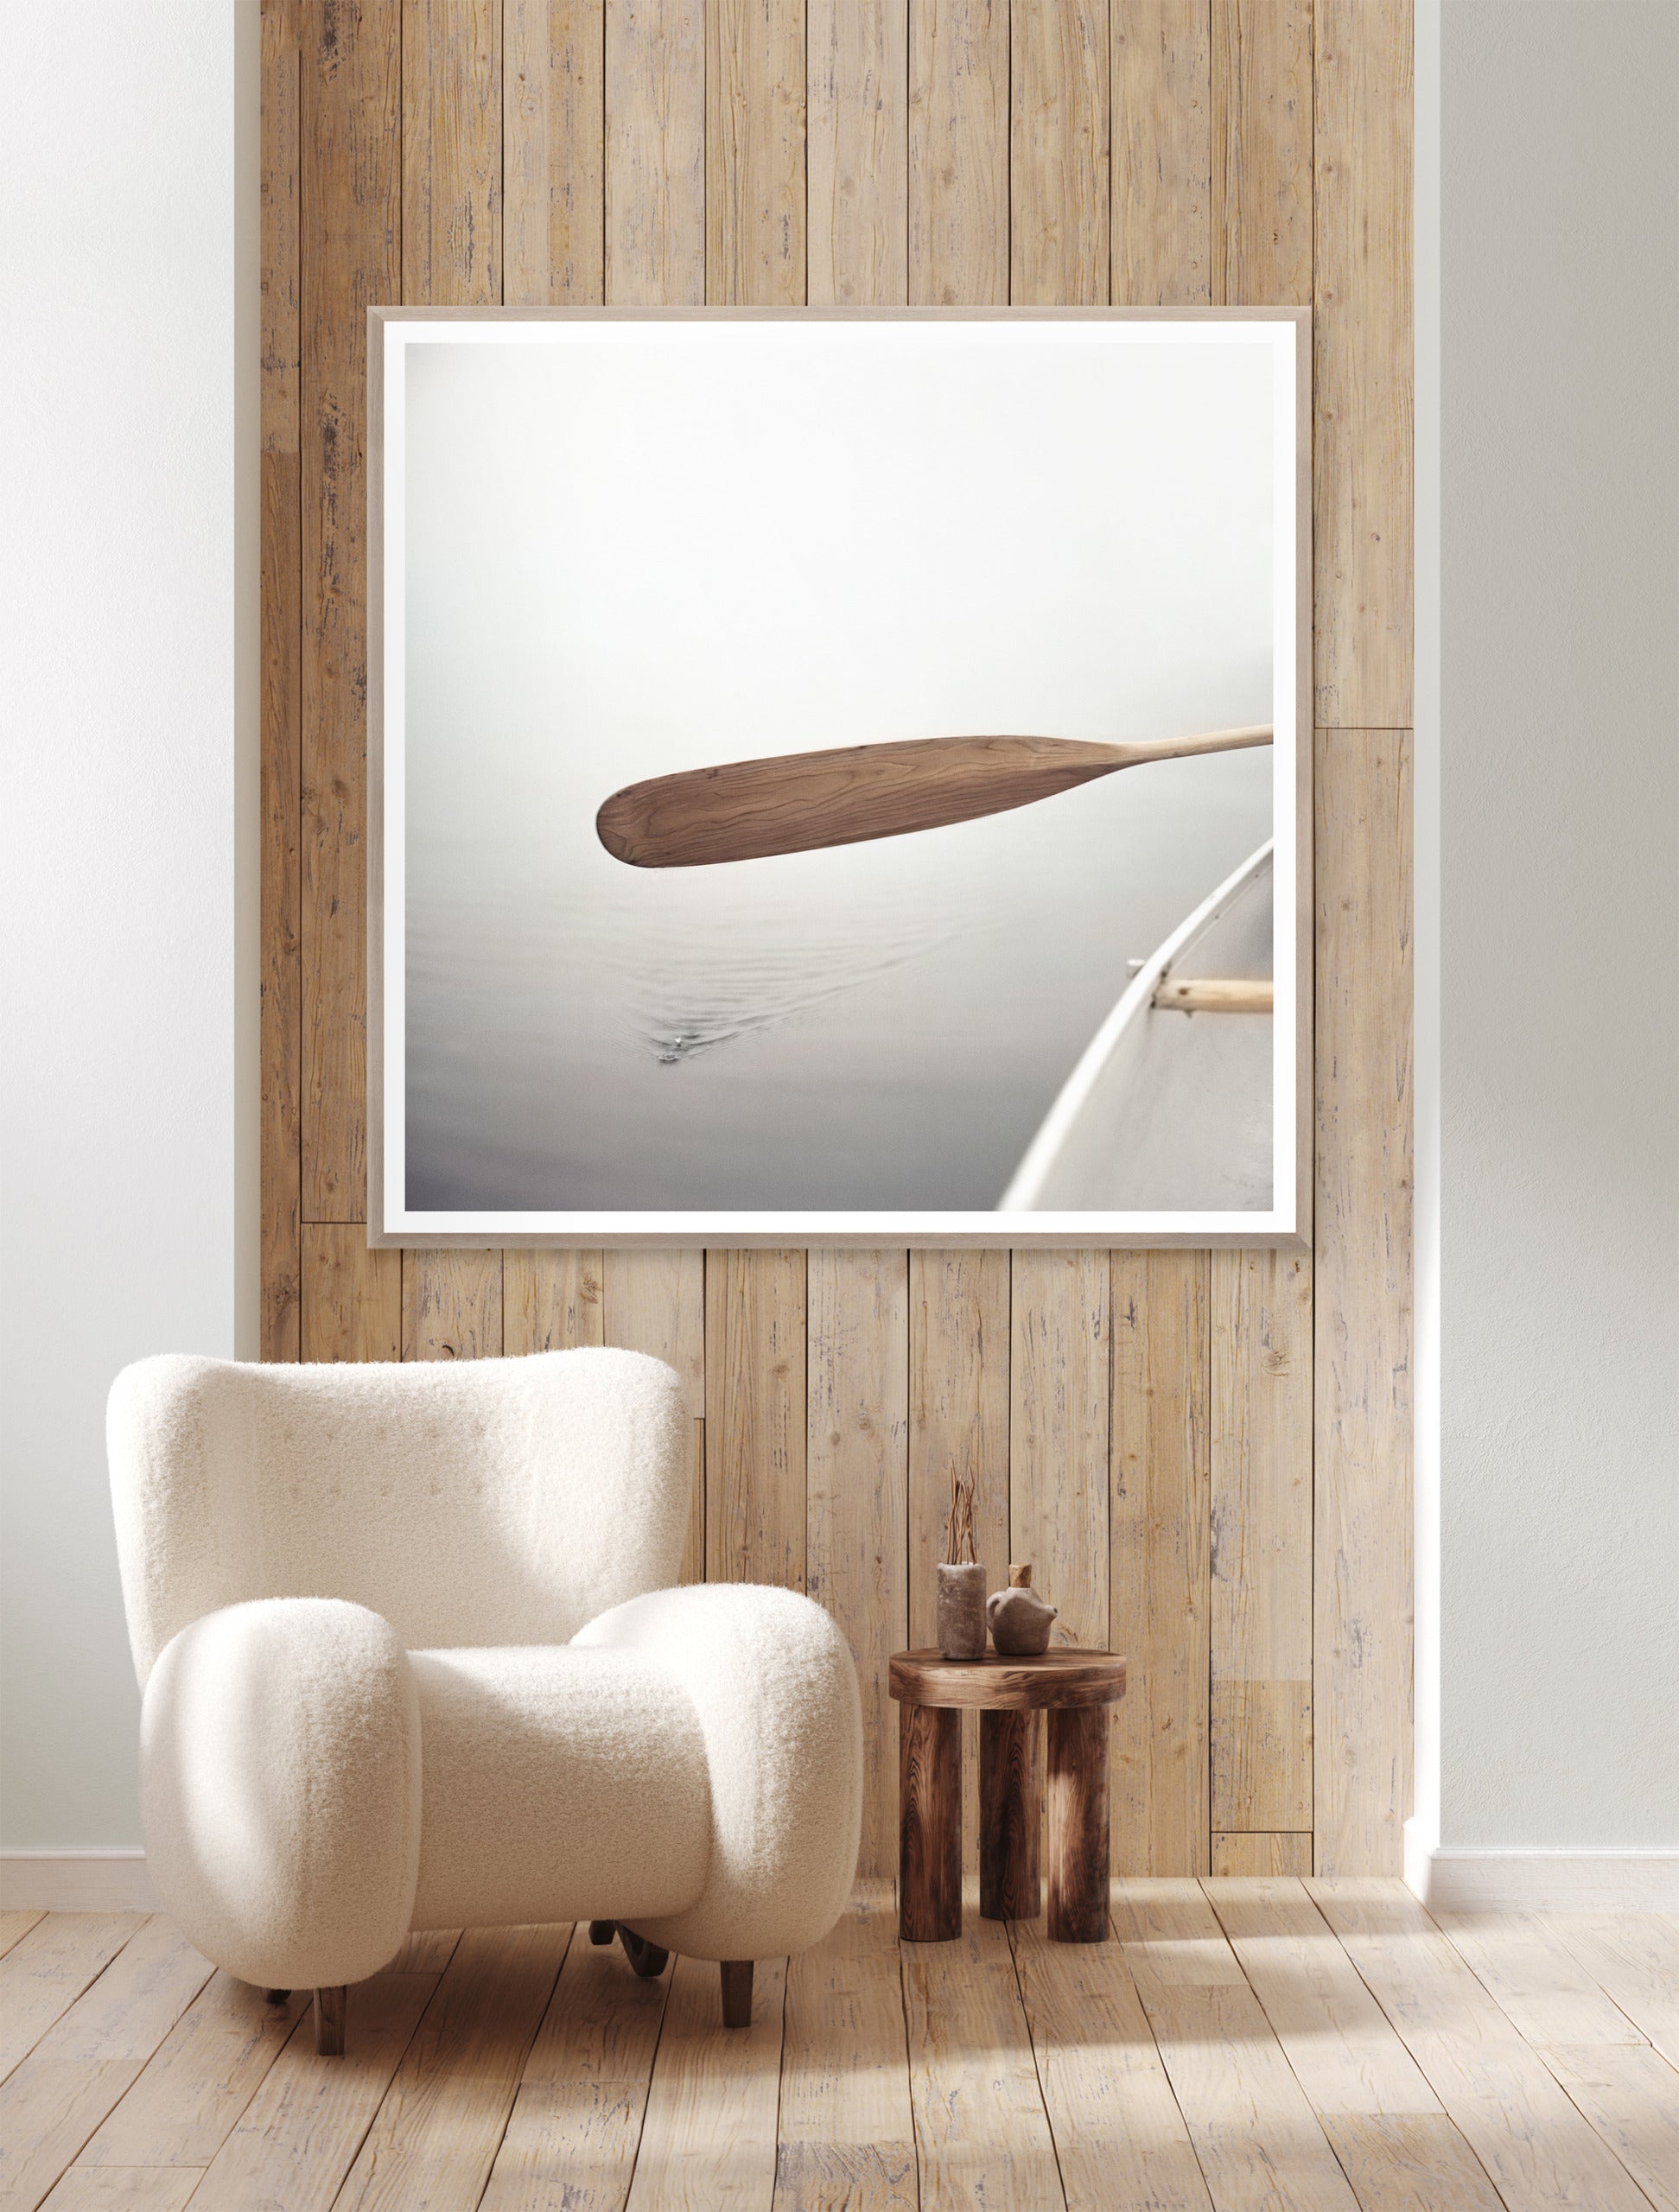 The Paddle Wall Art